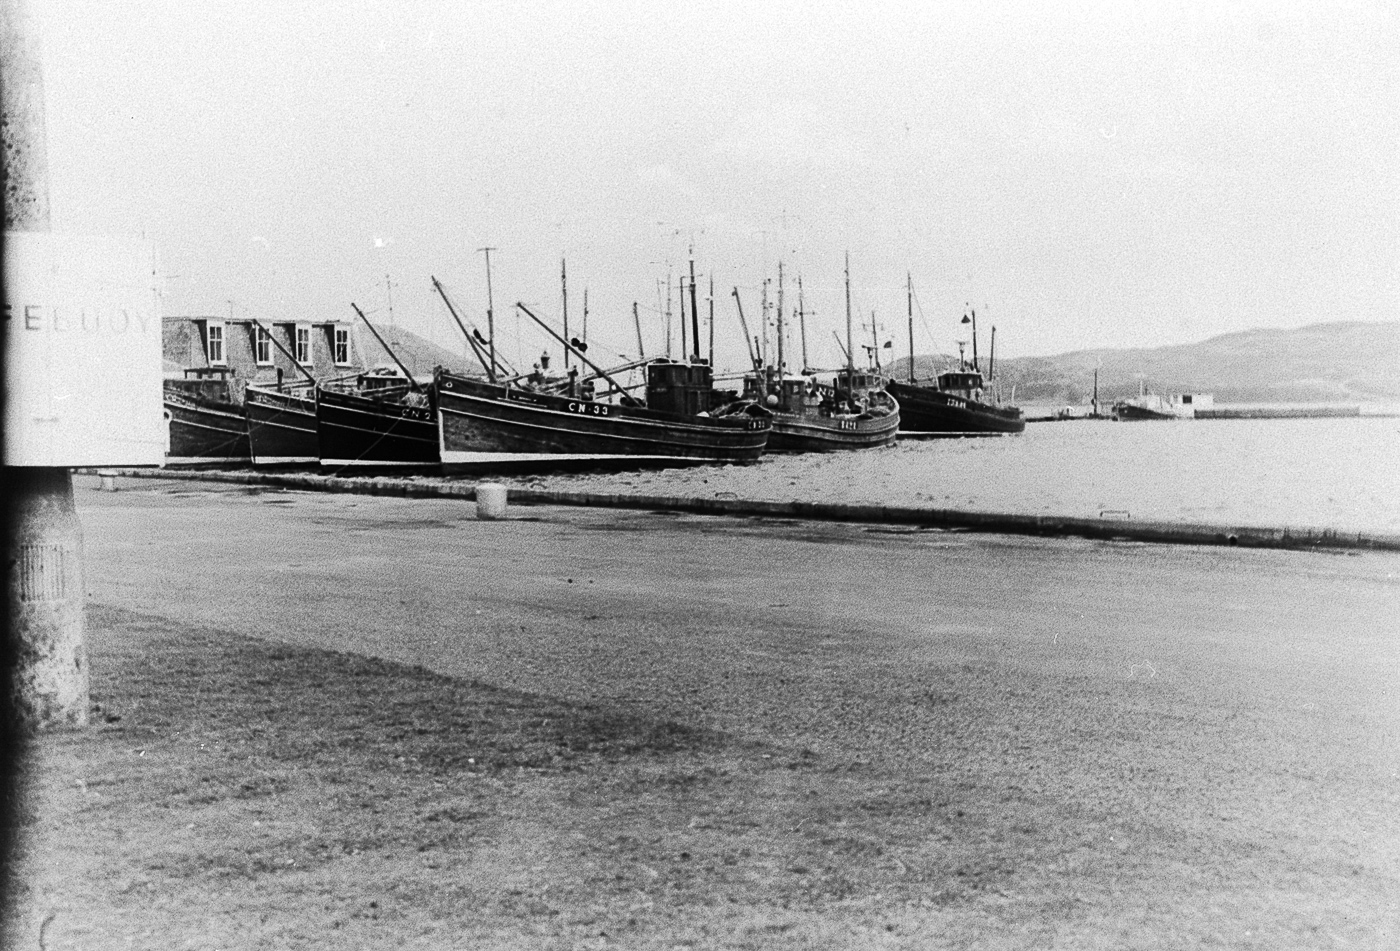 Ringnetters, Campbeltown. One of the boats pictured is 'Moira', CN33, built by Walter Reekies of St Monans. She later became 'Janese Watt', LK439, WK439 then 'Flame Lily', UL173.